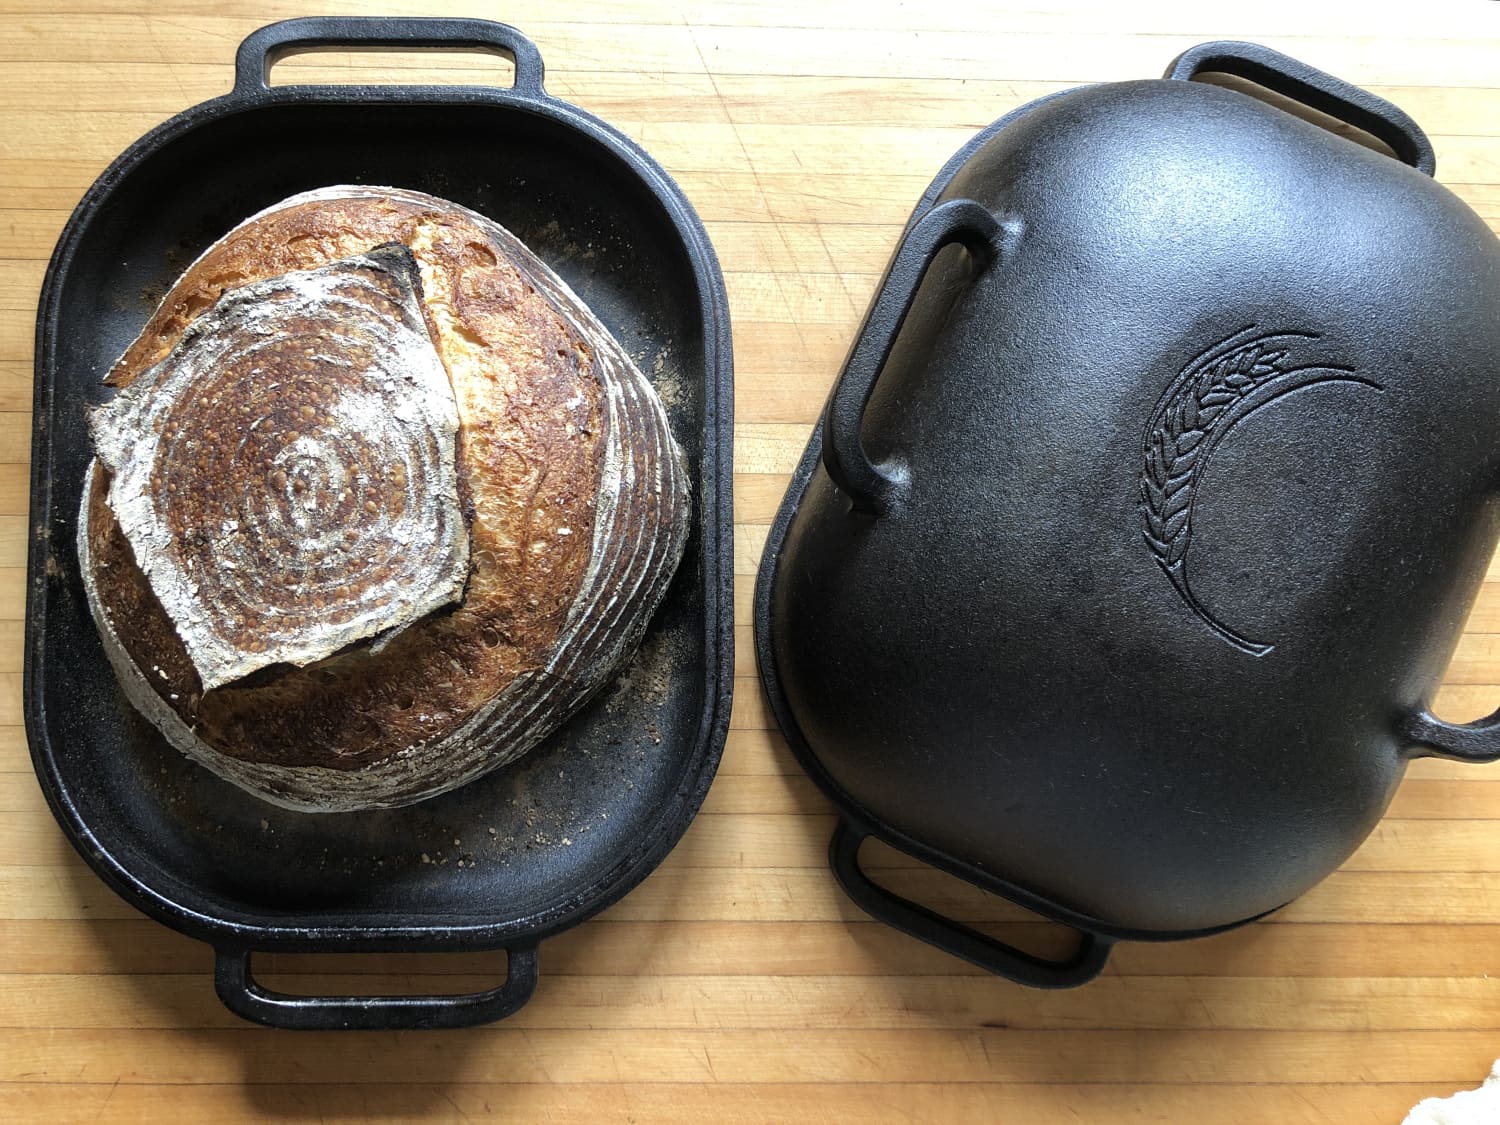 Challenger Bread Pan – Advice and Usage Guide